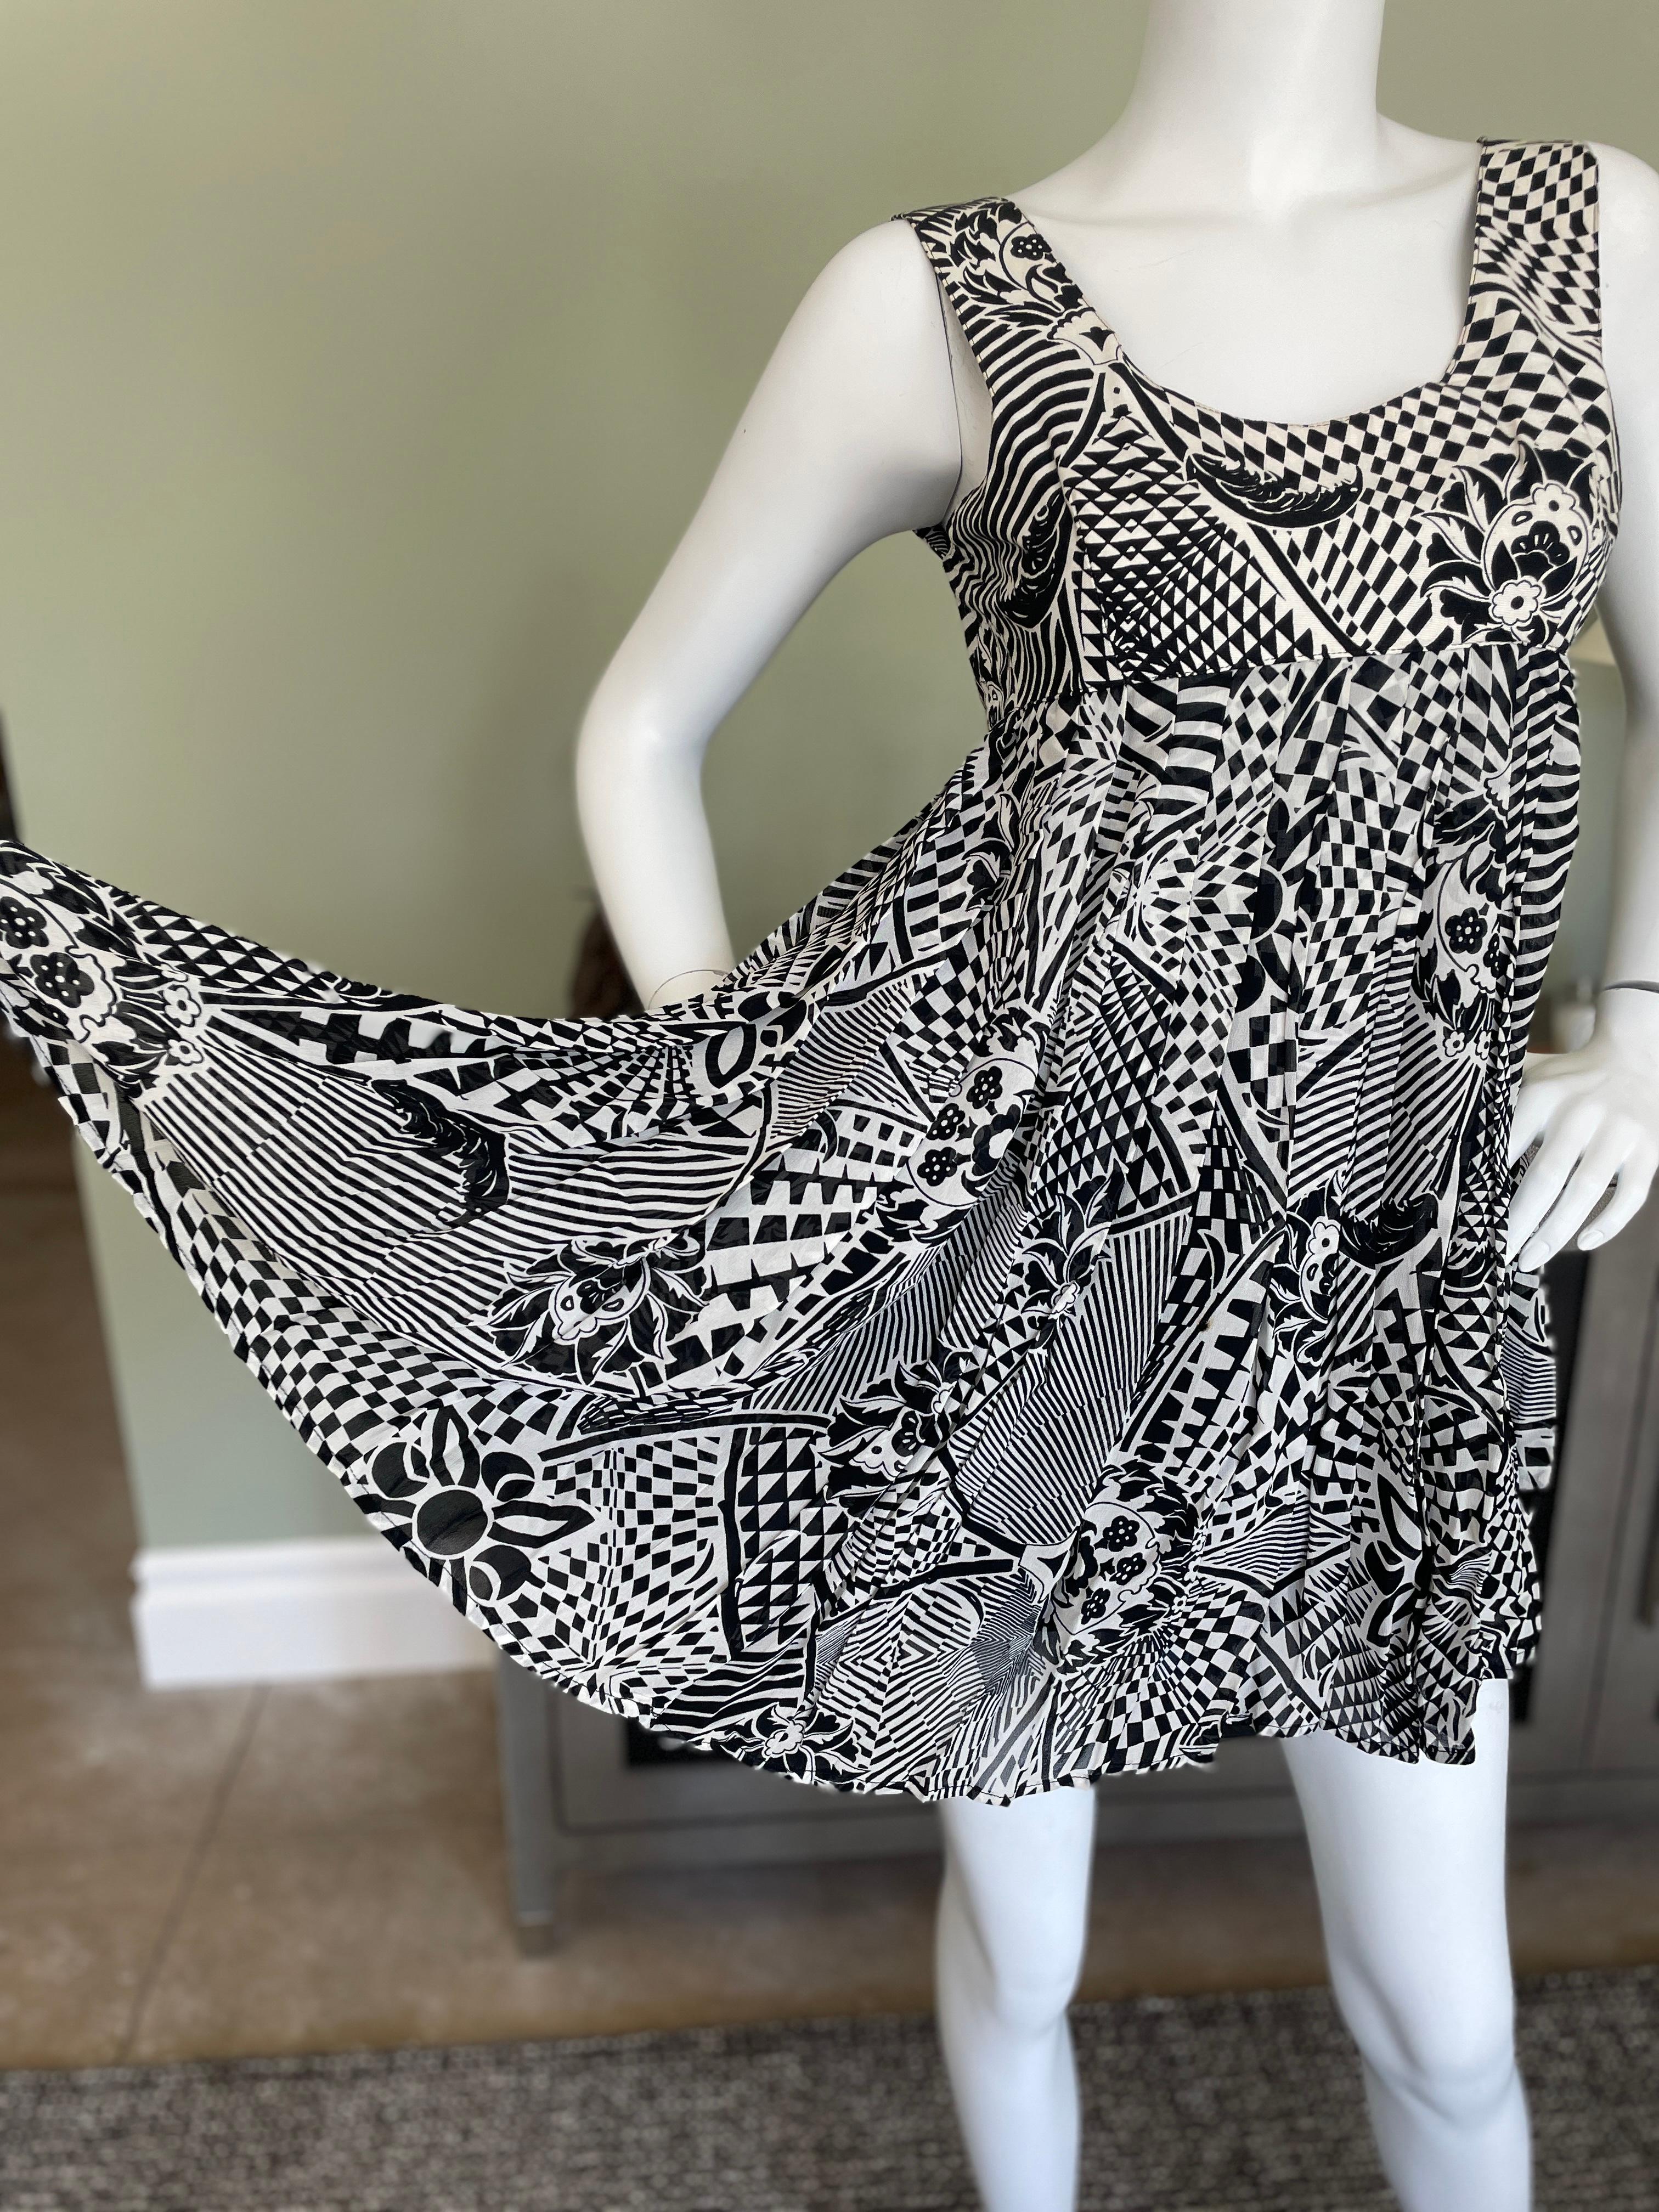 Gianni Versace for Versus Vintage Op Art Baby Doll Dress In Good Condition For Sale In Cloverdale, CA